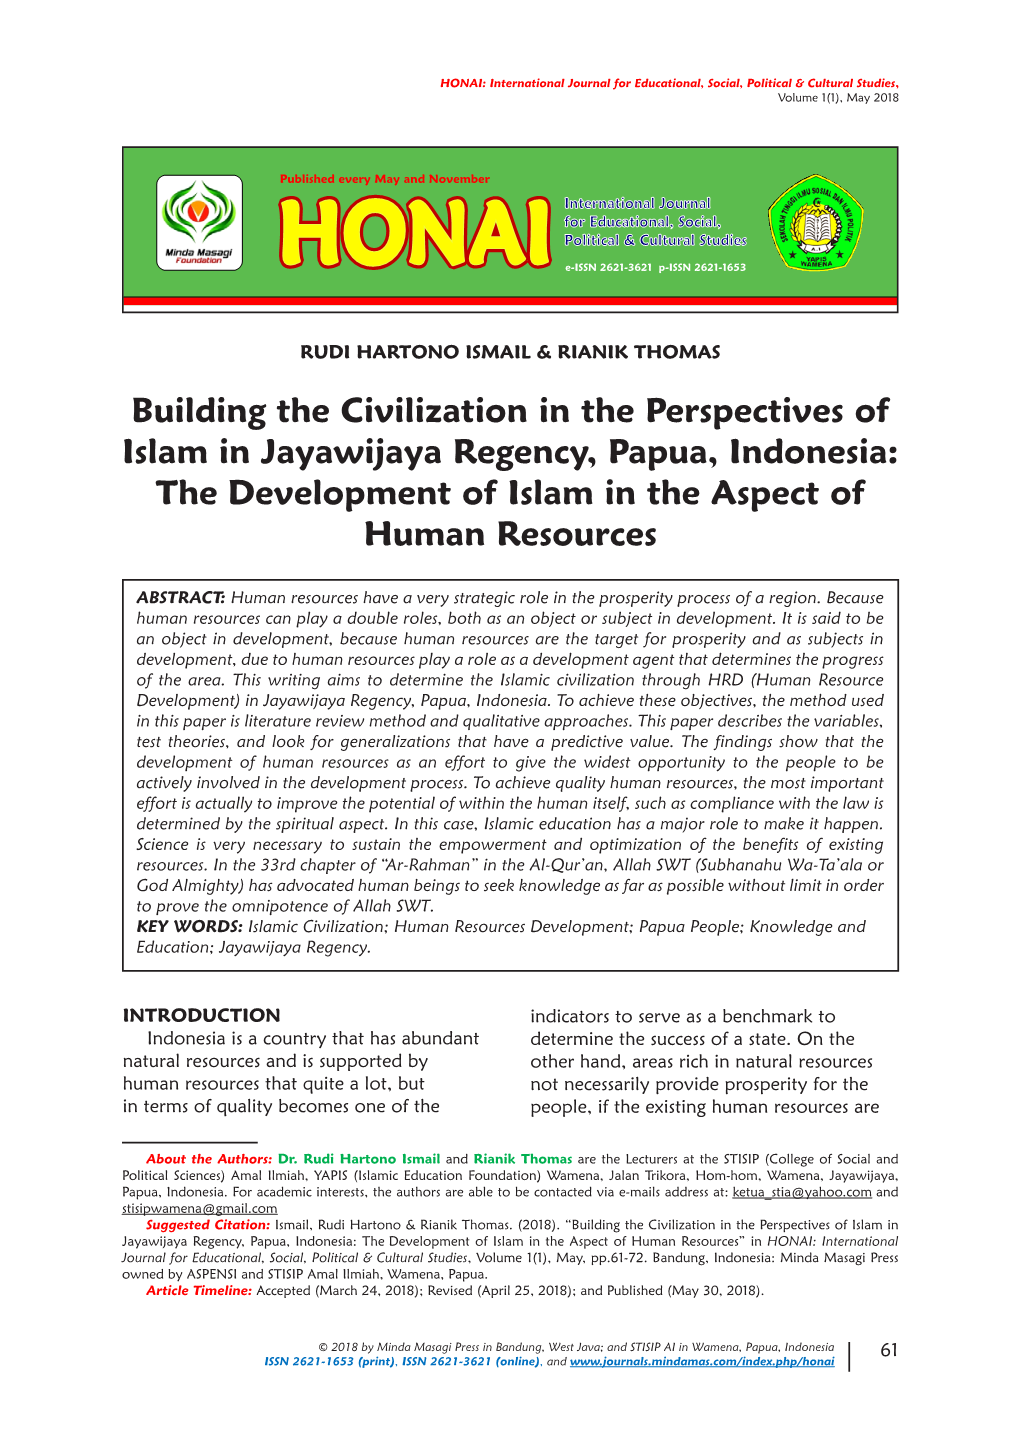 Building the Civilization in the Perspectives of Islam in Jayawijaya Regency, Papua, Indonesia: the Development of Islam in the Aspect of Human Resources